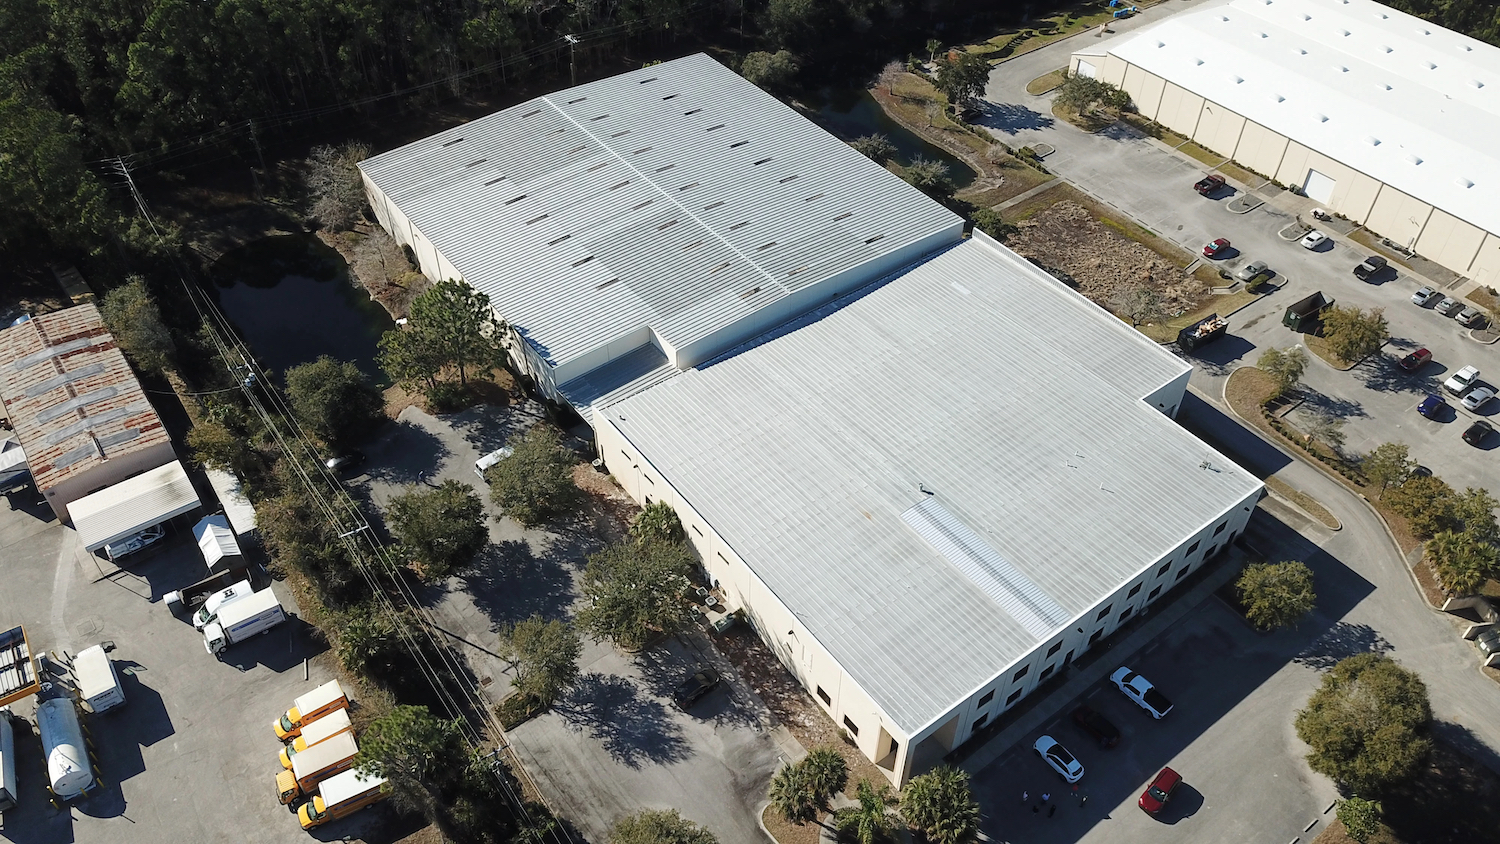 Florida Merchandise Company Buys 75,000-Square-Foot Production Factory